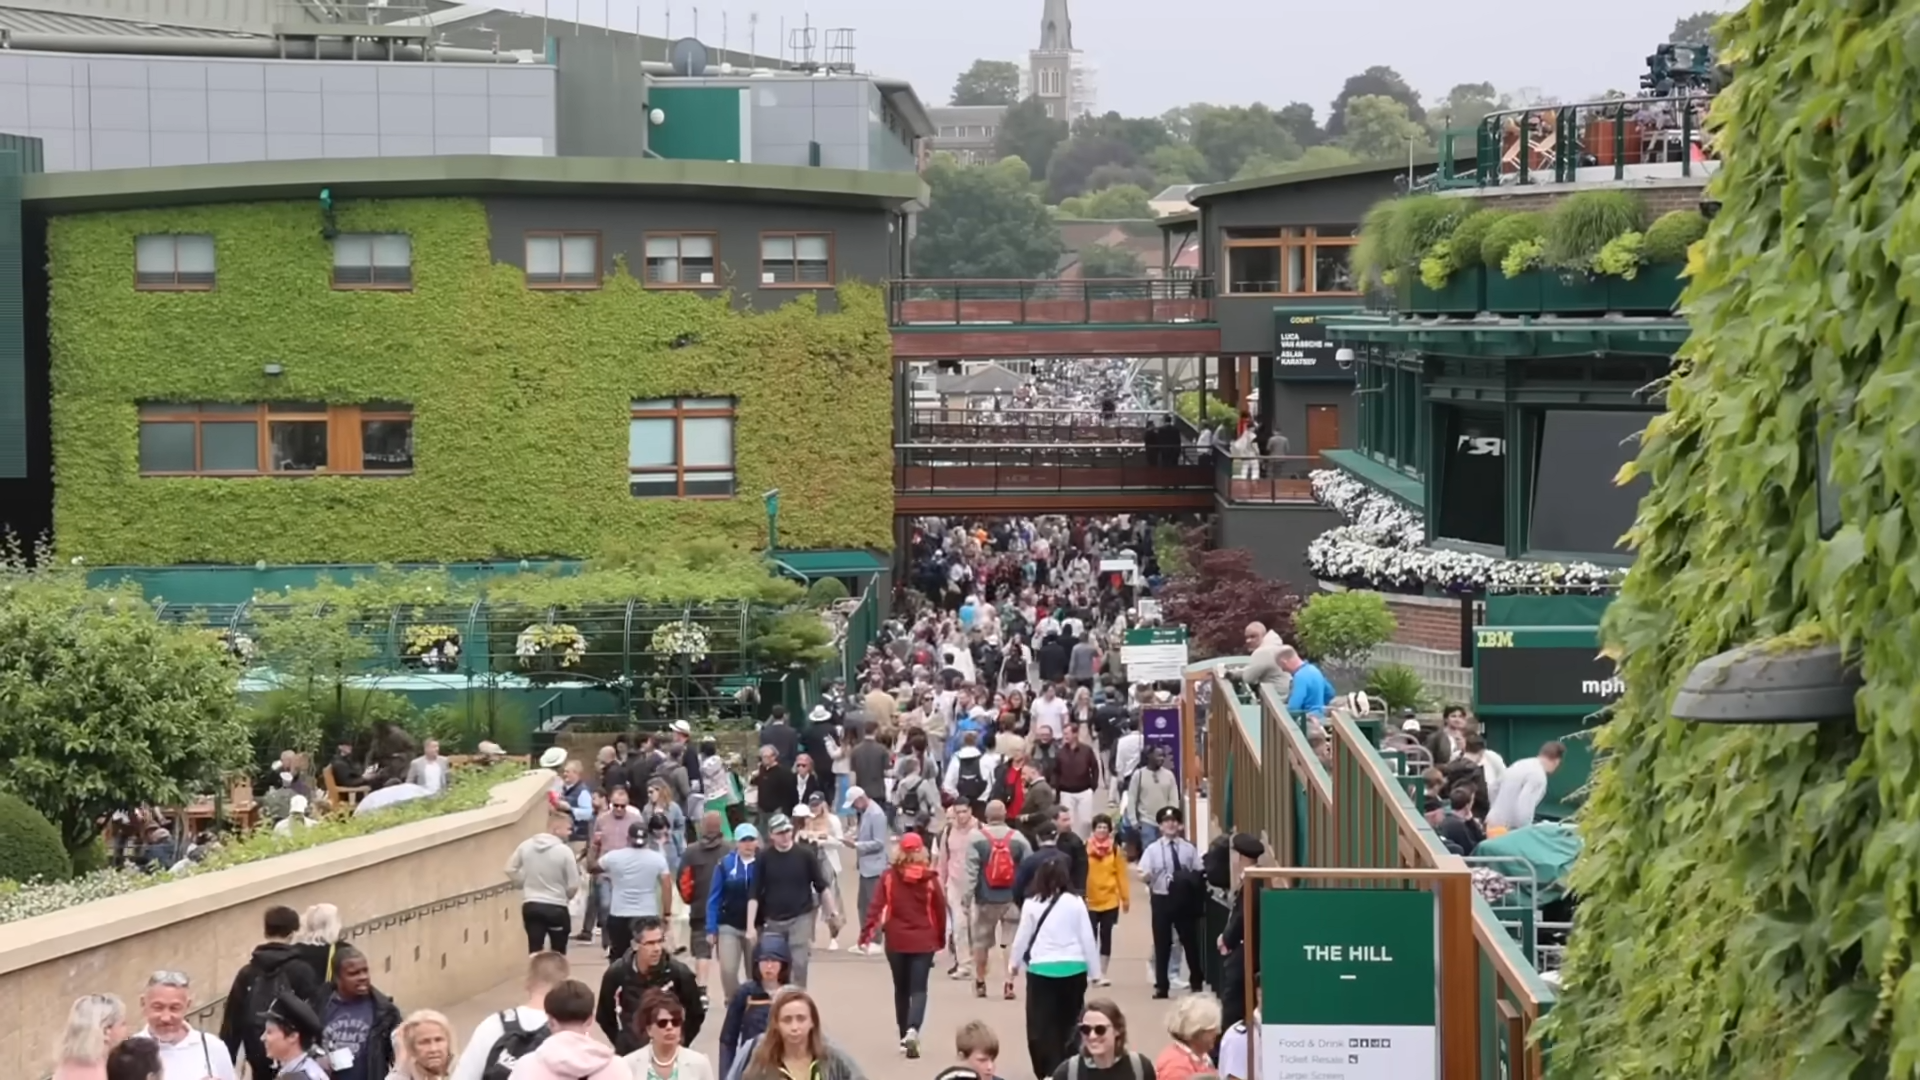 Expedia says hotels in the Wimbledon area that used Expedia sponsored listings saw a surge in revenue. Source: Paige Lorenze/Wikimedia Commons https://commons.wikimedia.org/wiki/File:Crowds_at_Wimbledon_2023_02.png 